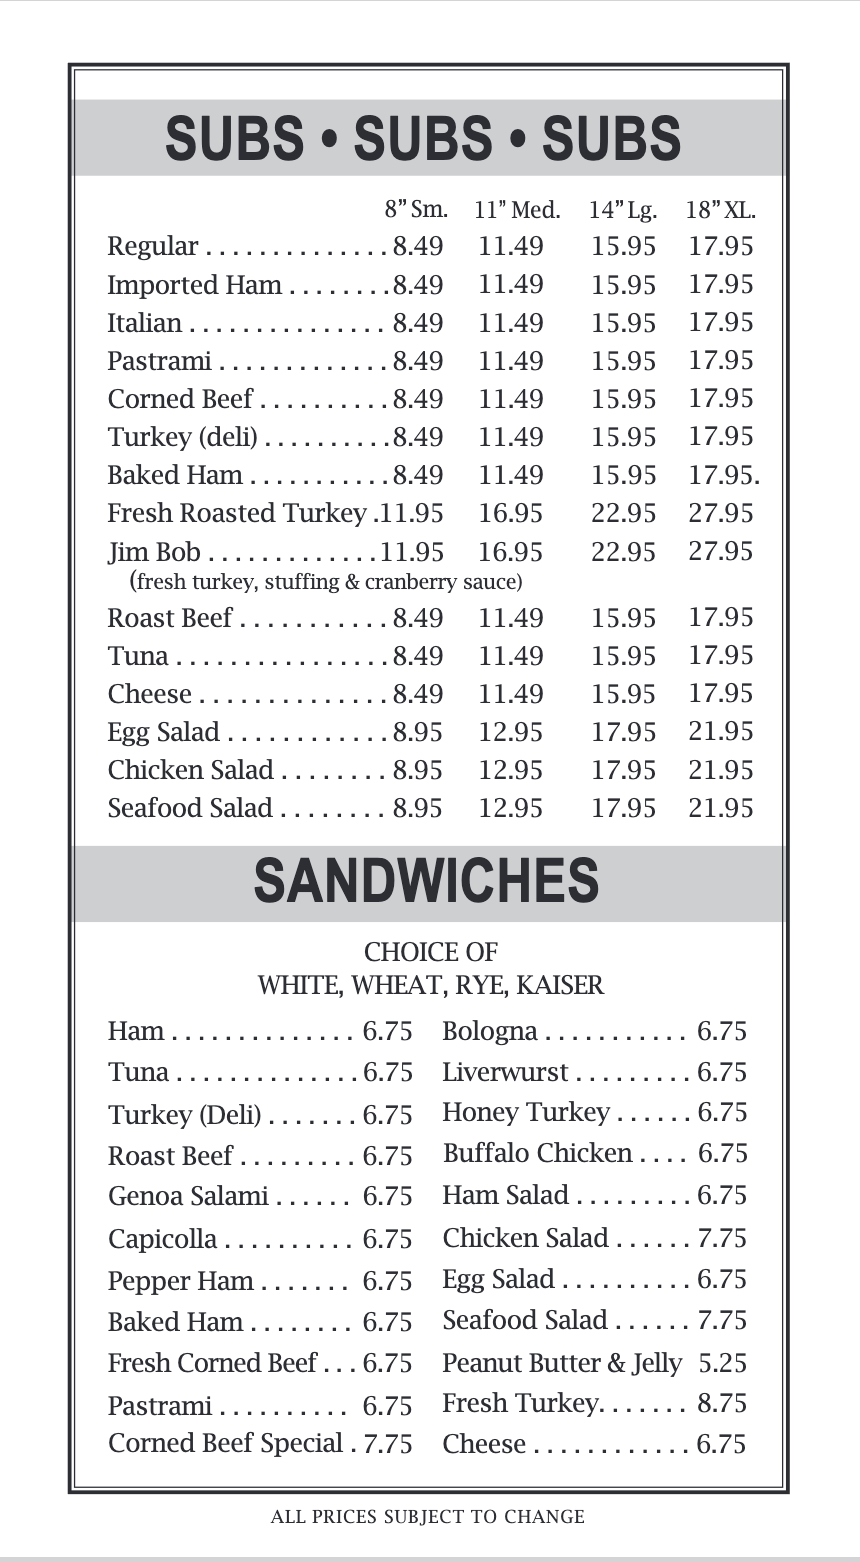 Subs and Sandwiches Menu